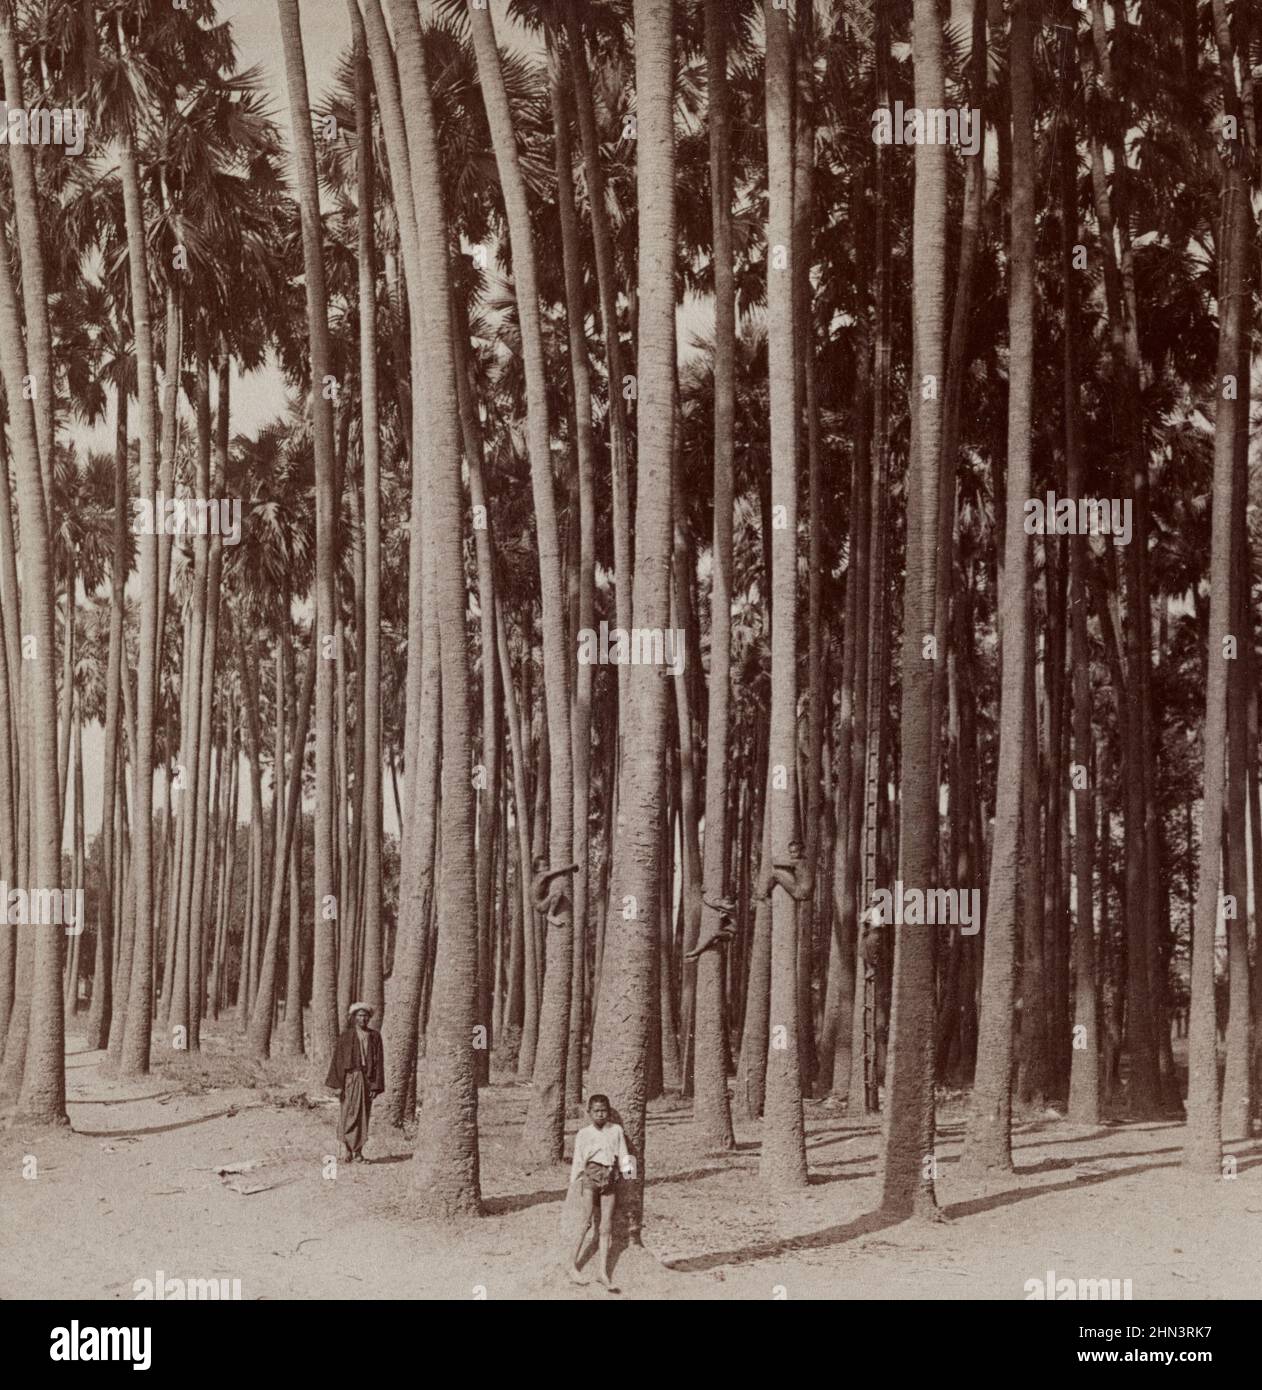 Vintage photo of toddy palms (doub palm, palmyra palm, tala) of 100 feet tall (bamboo ladder on the background reaches to flower stalk). Pagan, Burma. Stock Photo